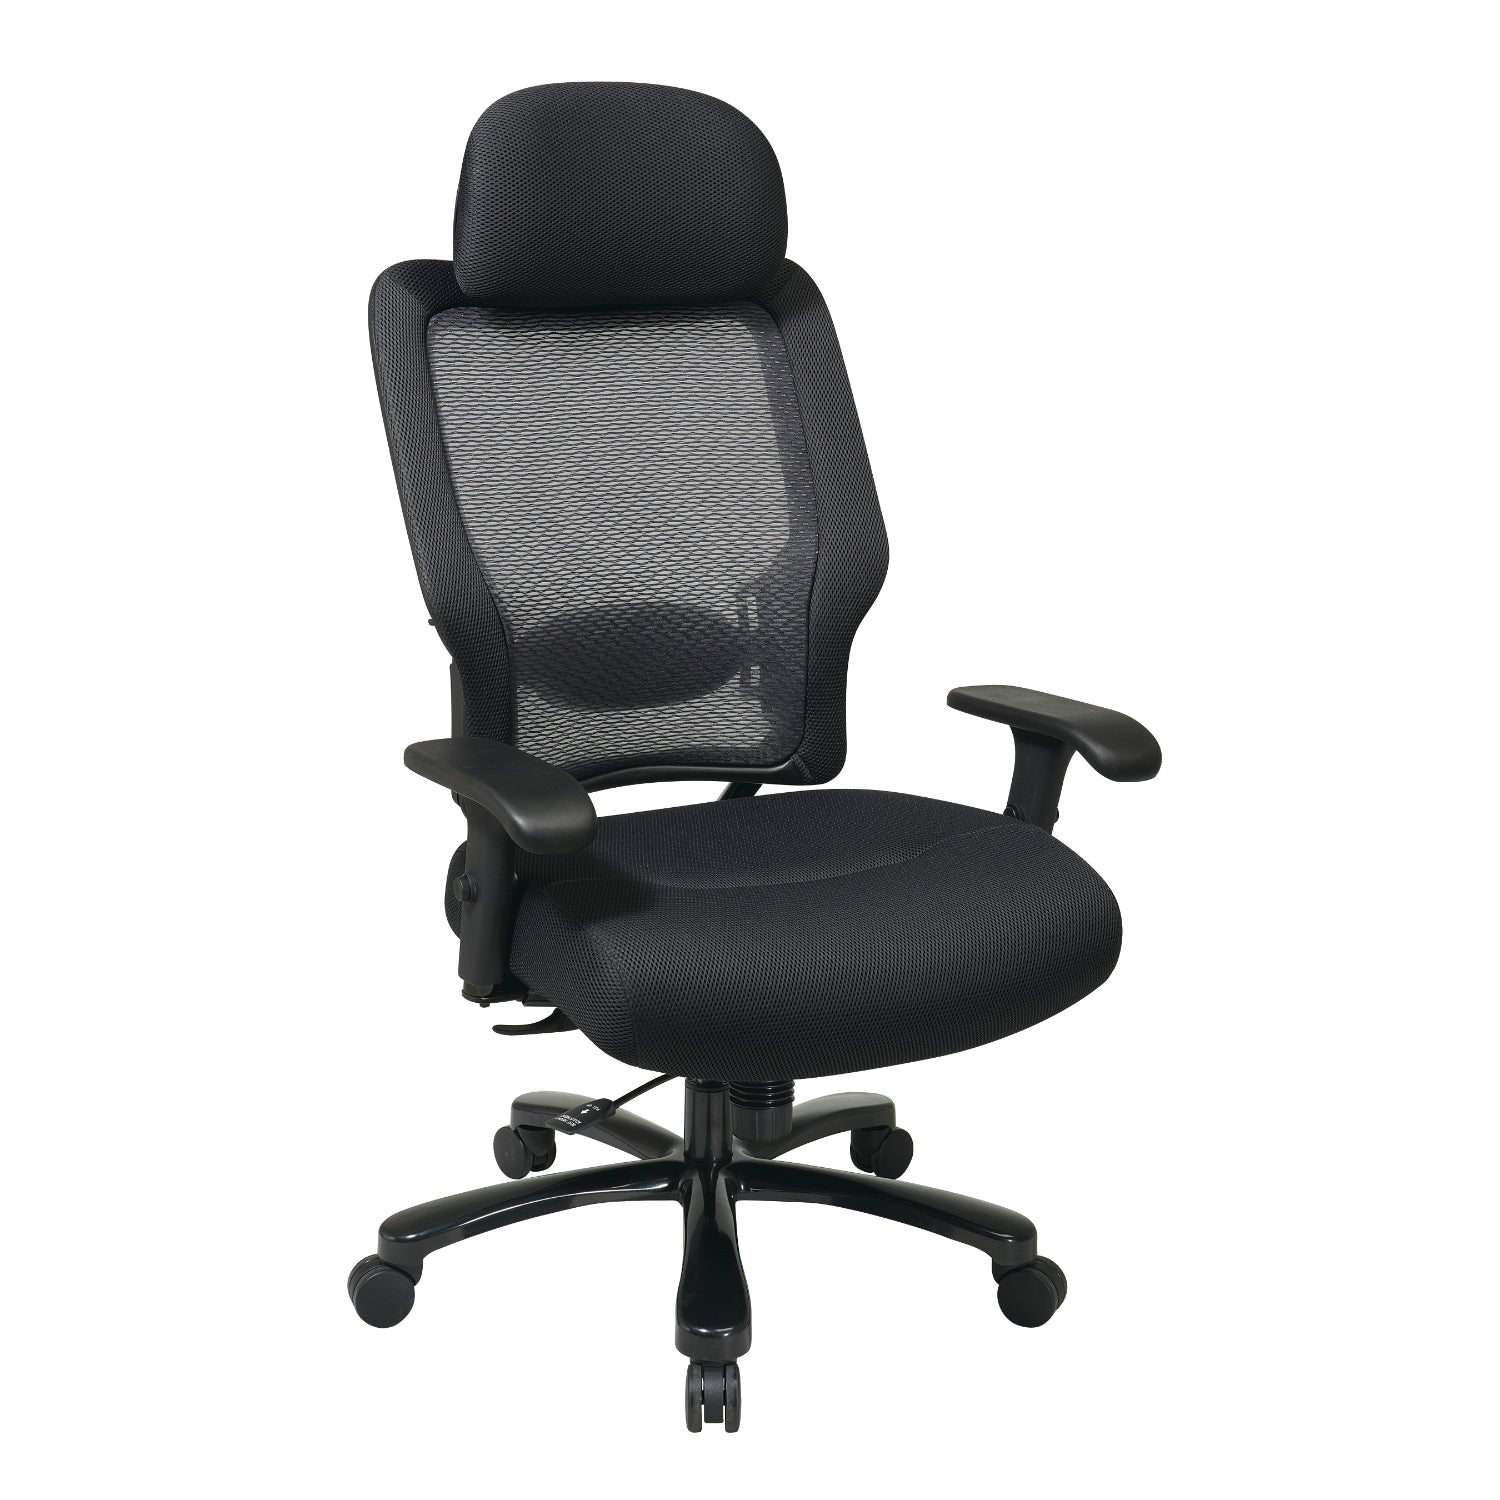 Big and Tall Deluxe Air Grid® Back Manager’s Chair with Black Mesh Seat, Adjustable Headrest, 2-Way Adjustable Arms, Adjustable Lumbar and Industrial Steel Finish Base